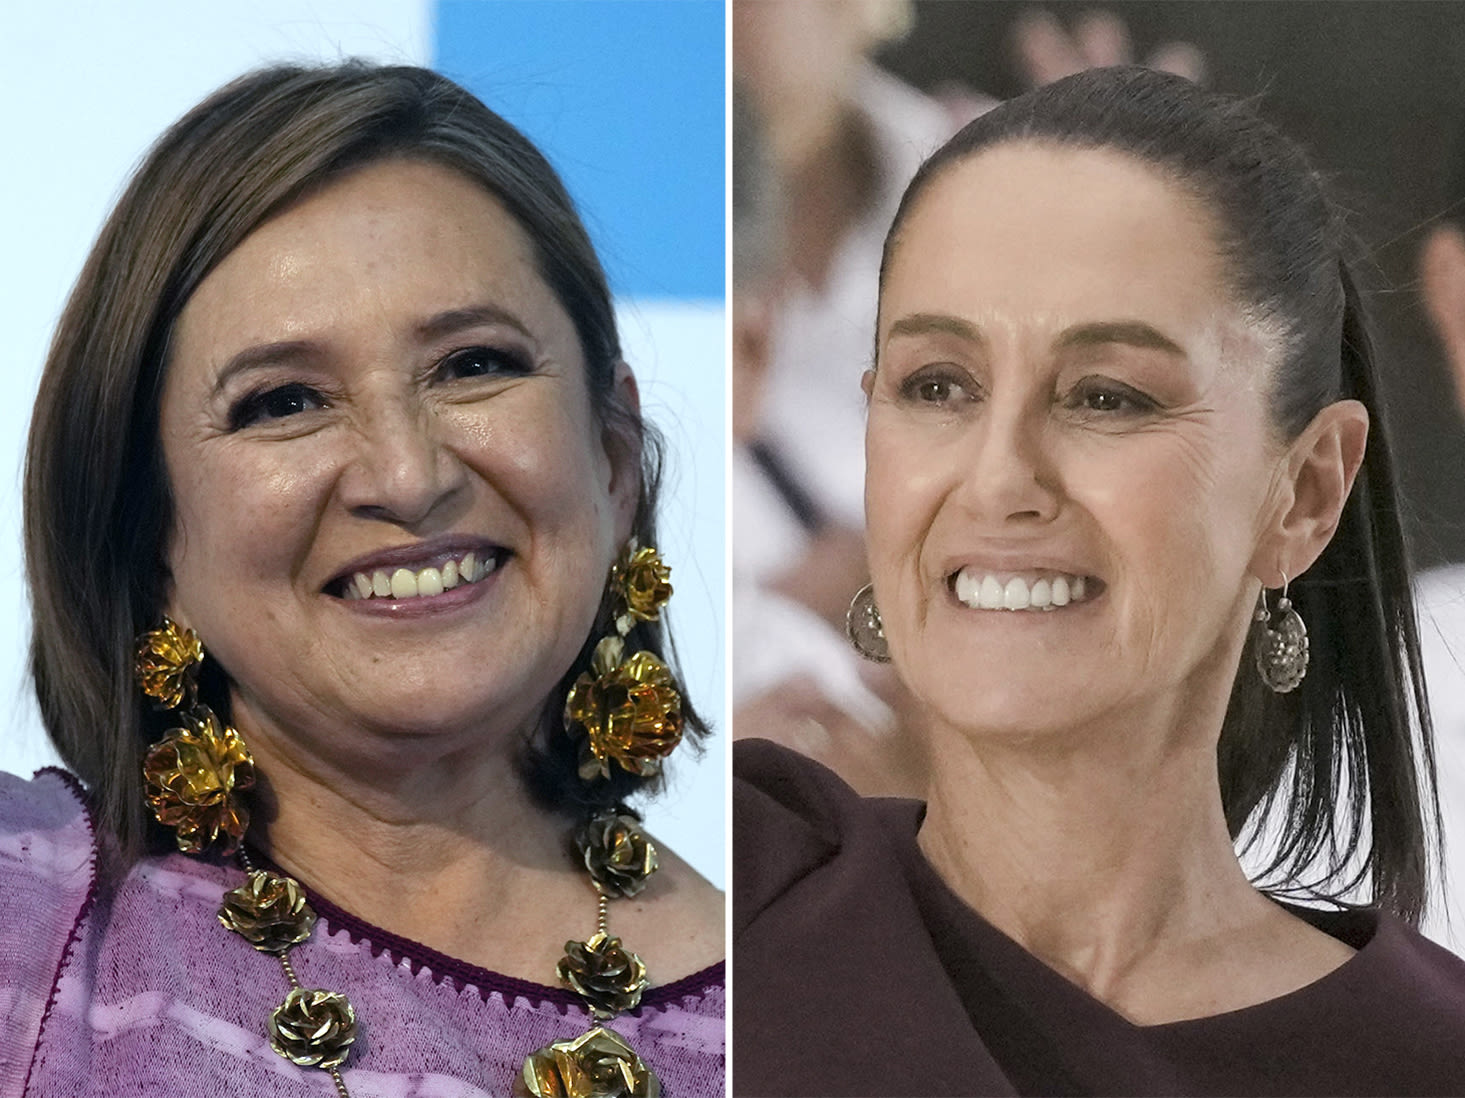 Live updates: Mexico to vote in historic election with leading woman presidential candidates